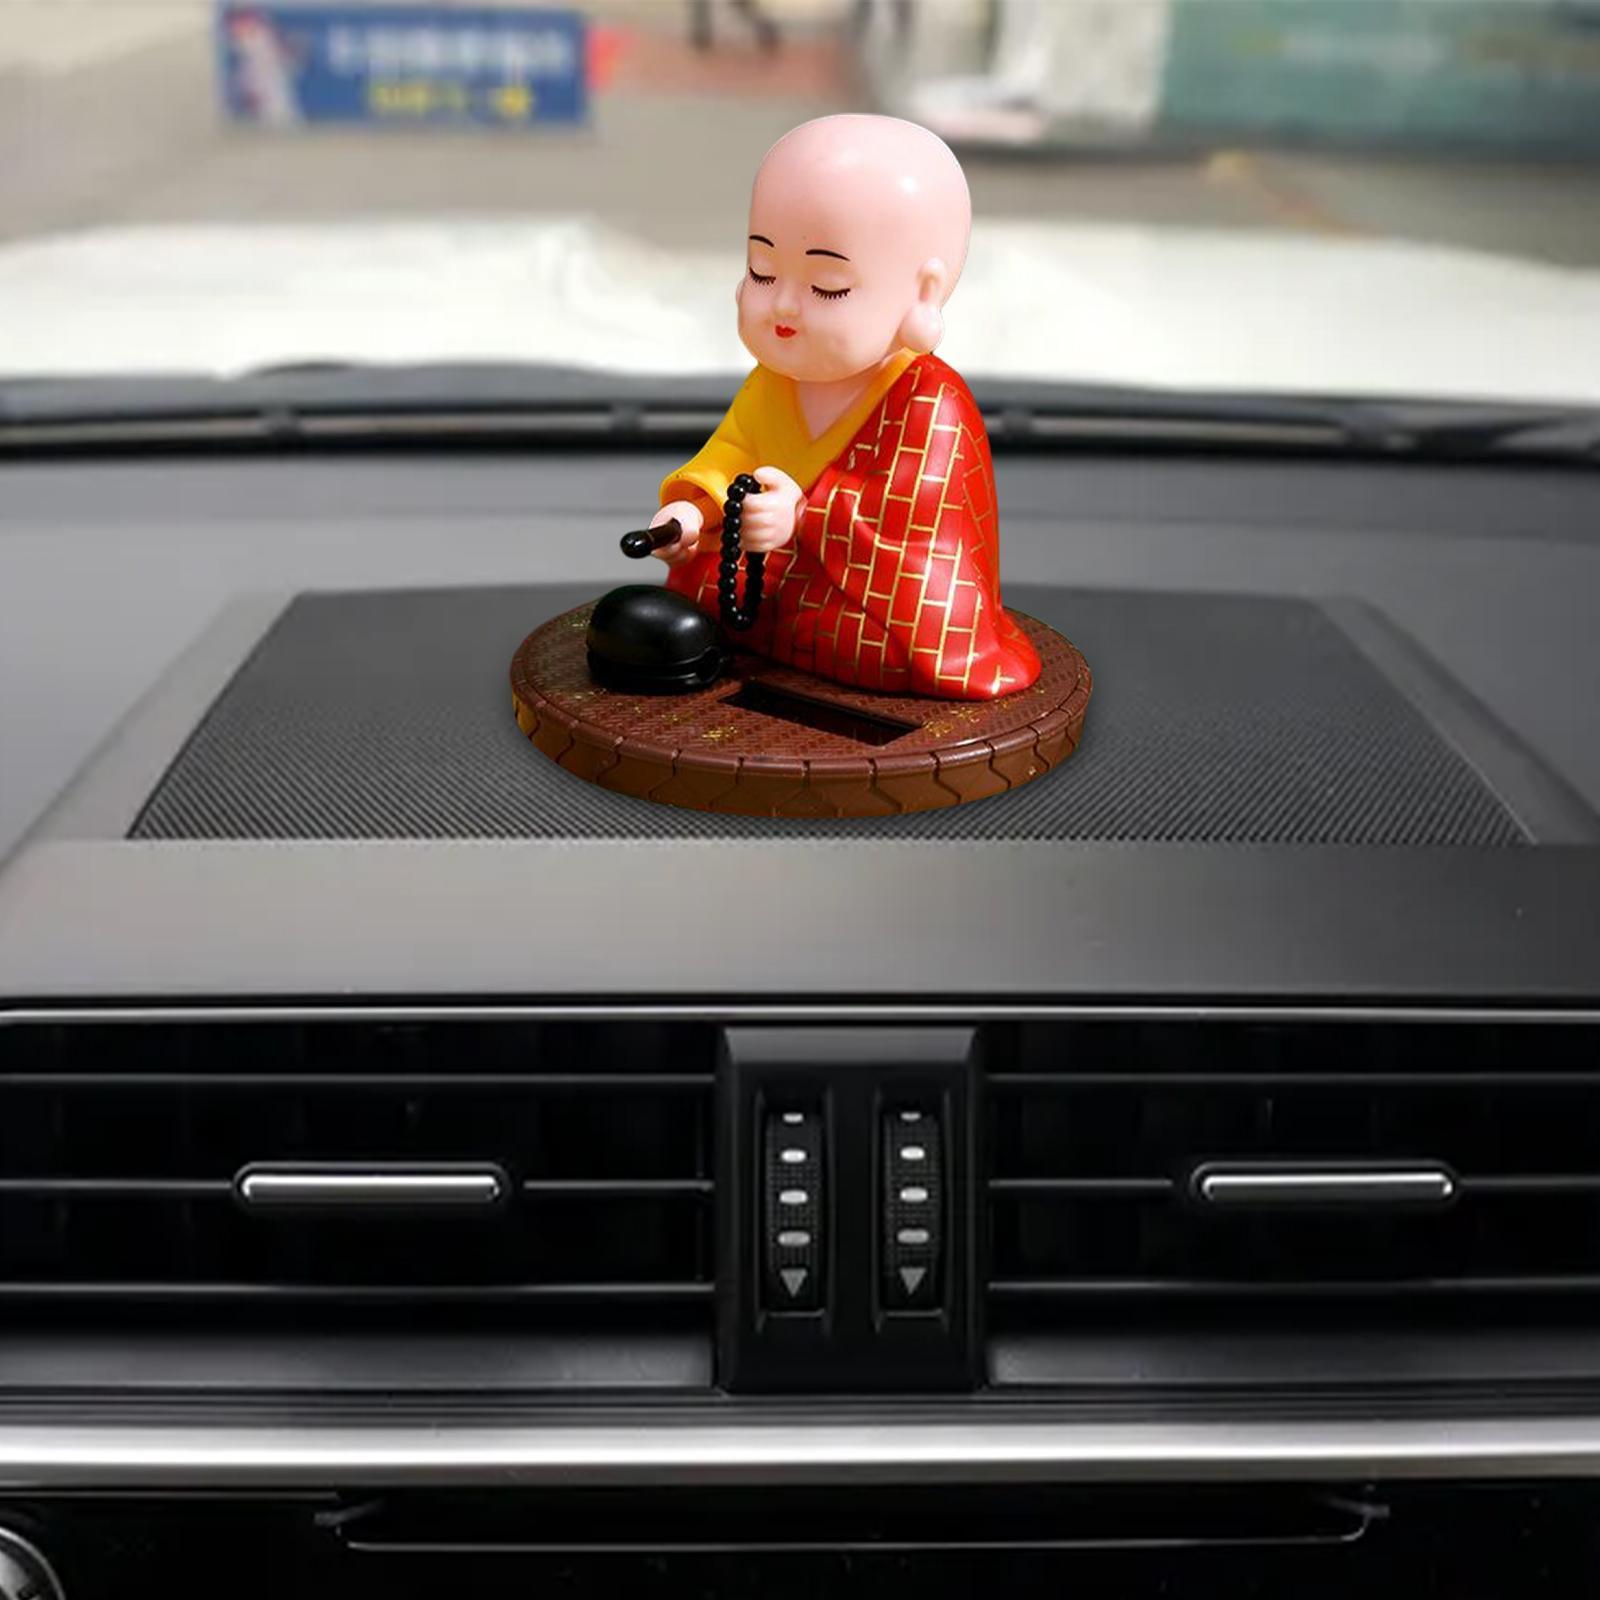 Nodding Head Dancing Toy  Crafts Car Interior Bobblehead Toy for Car Dashboard Colleagues